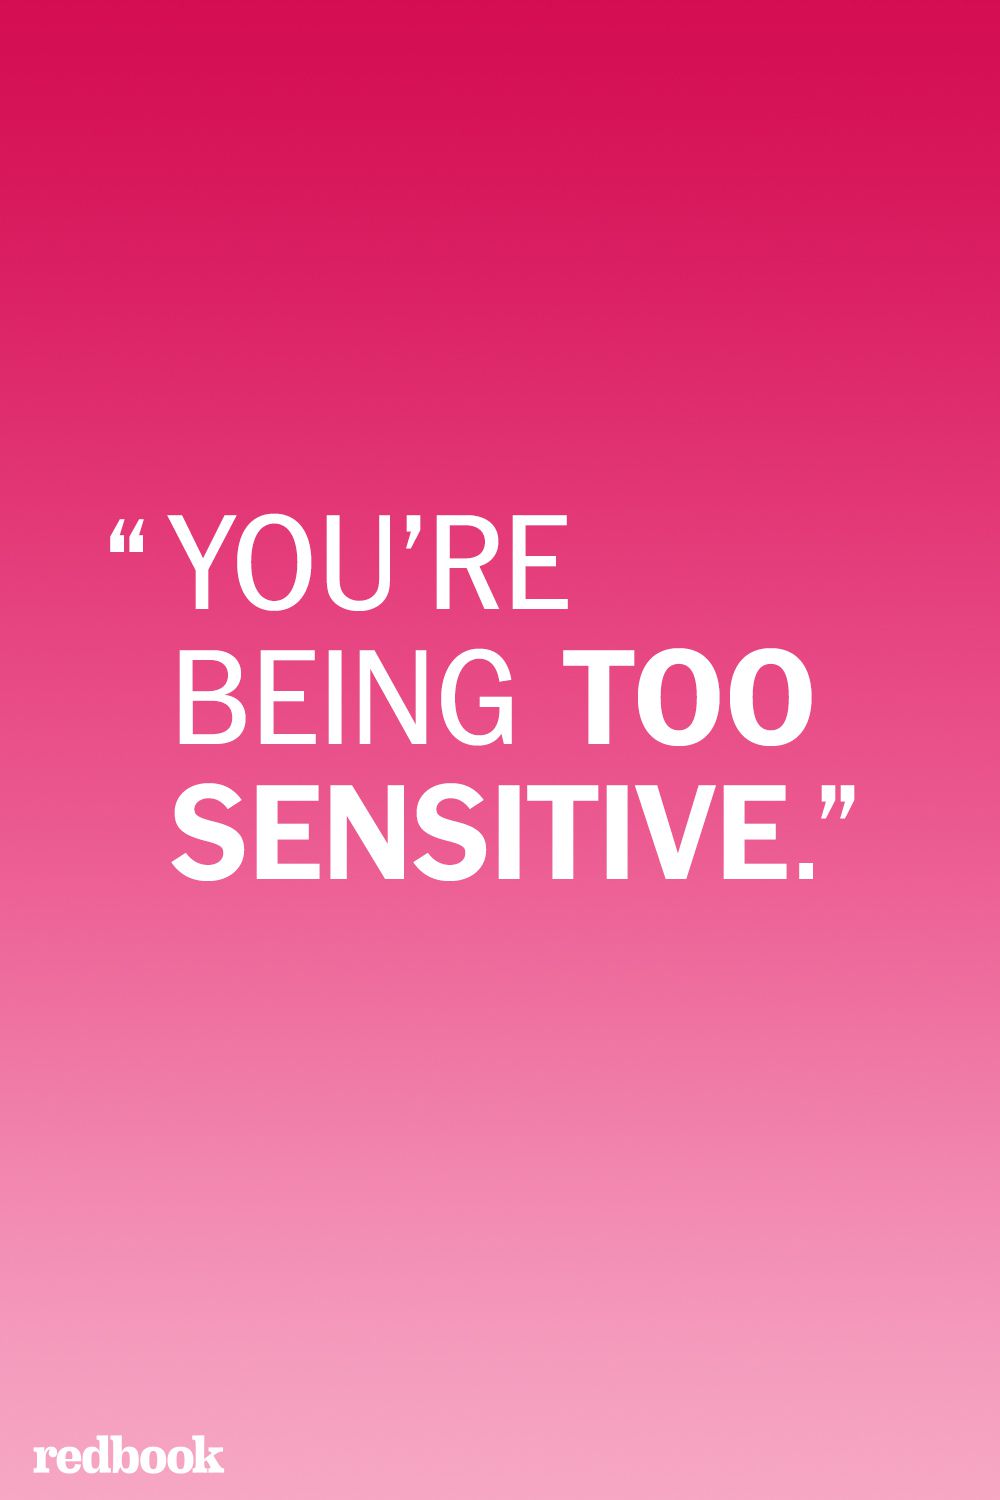 graphics - "You'Re Being Too Sensitive." redbook